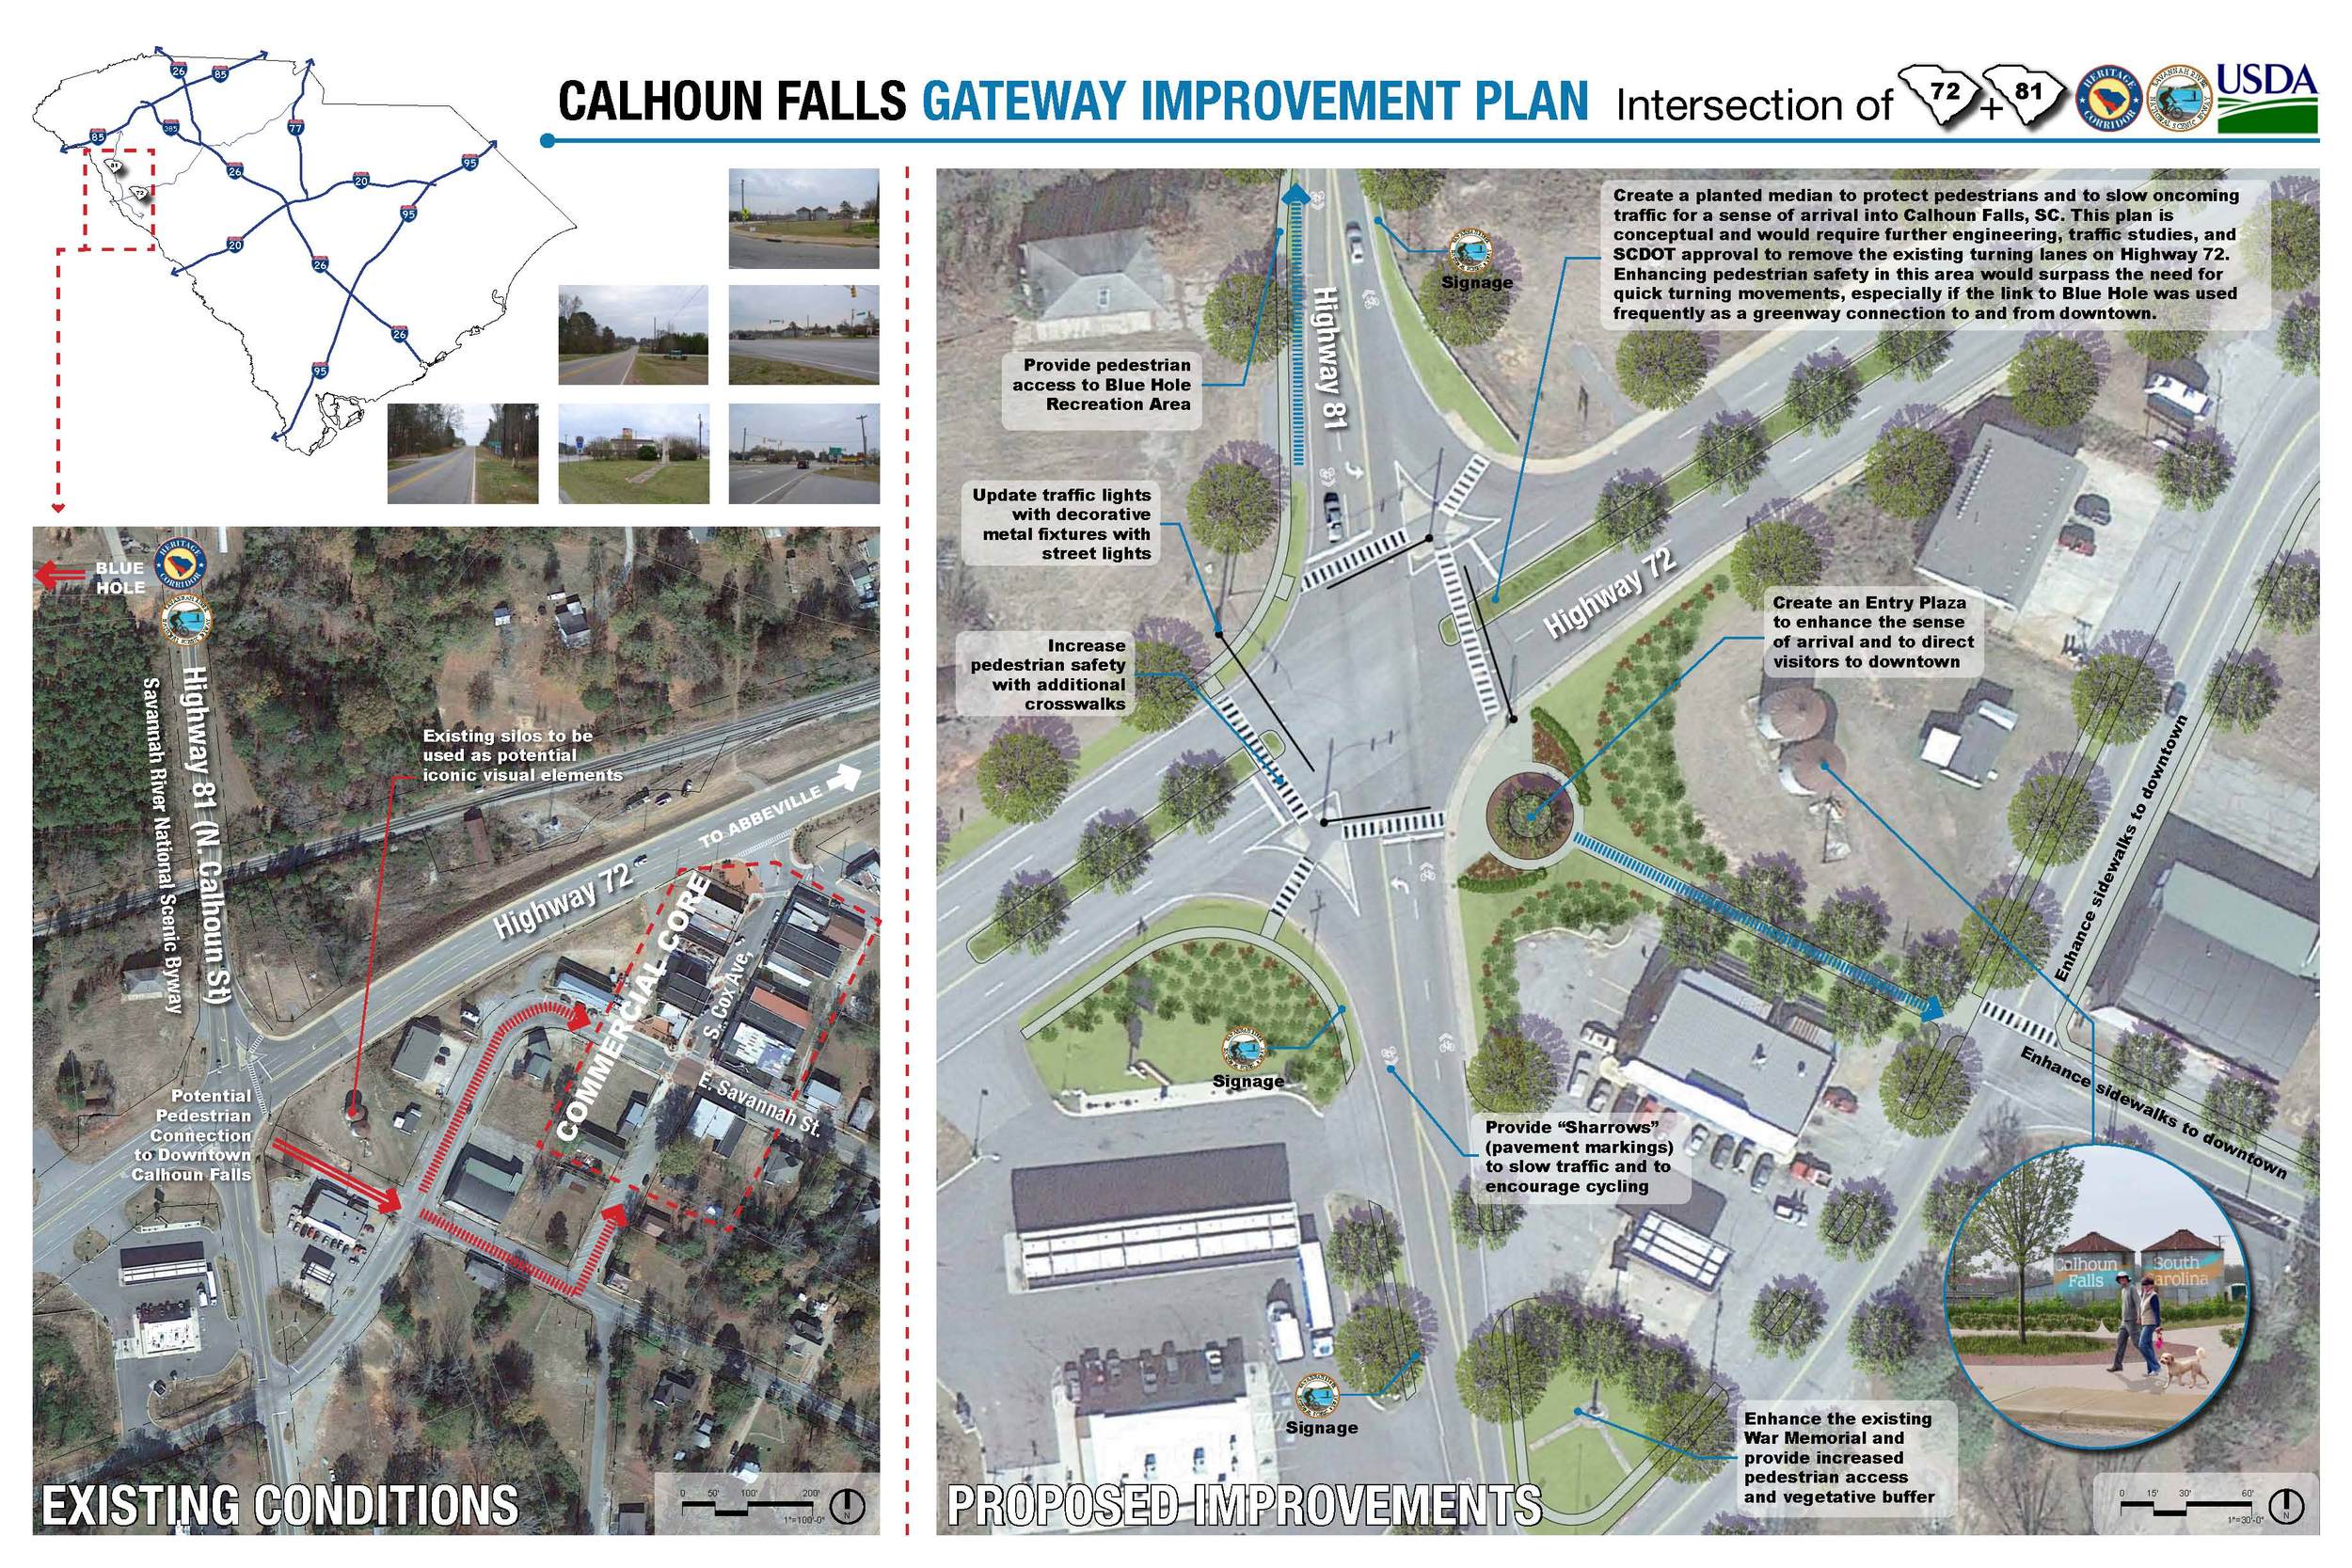 CalhounFalls-Intersection-Plan-091014-small_Page_2.jpg